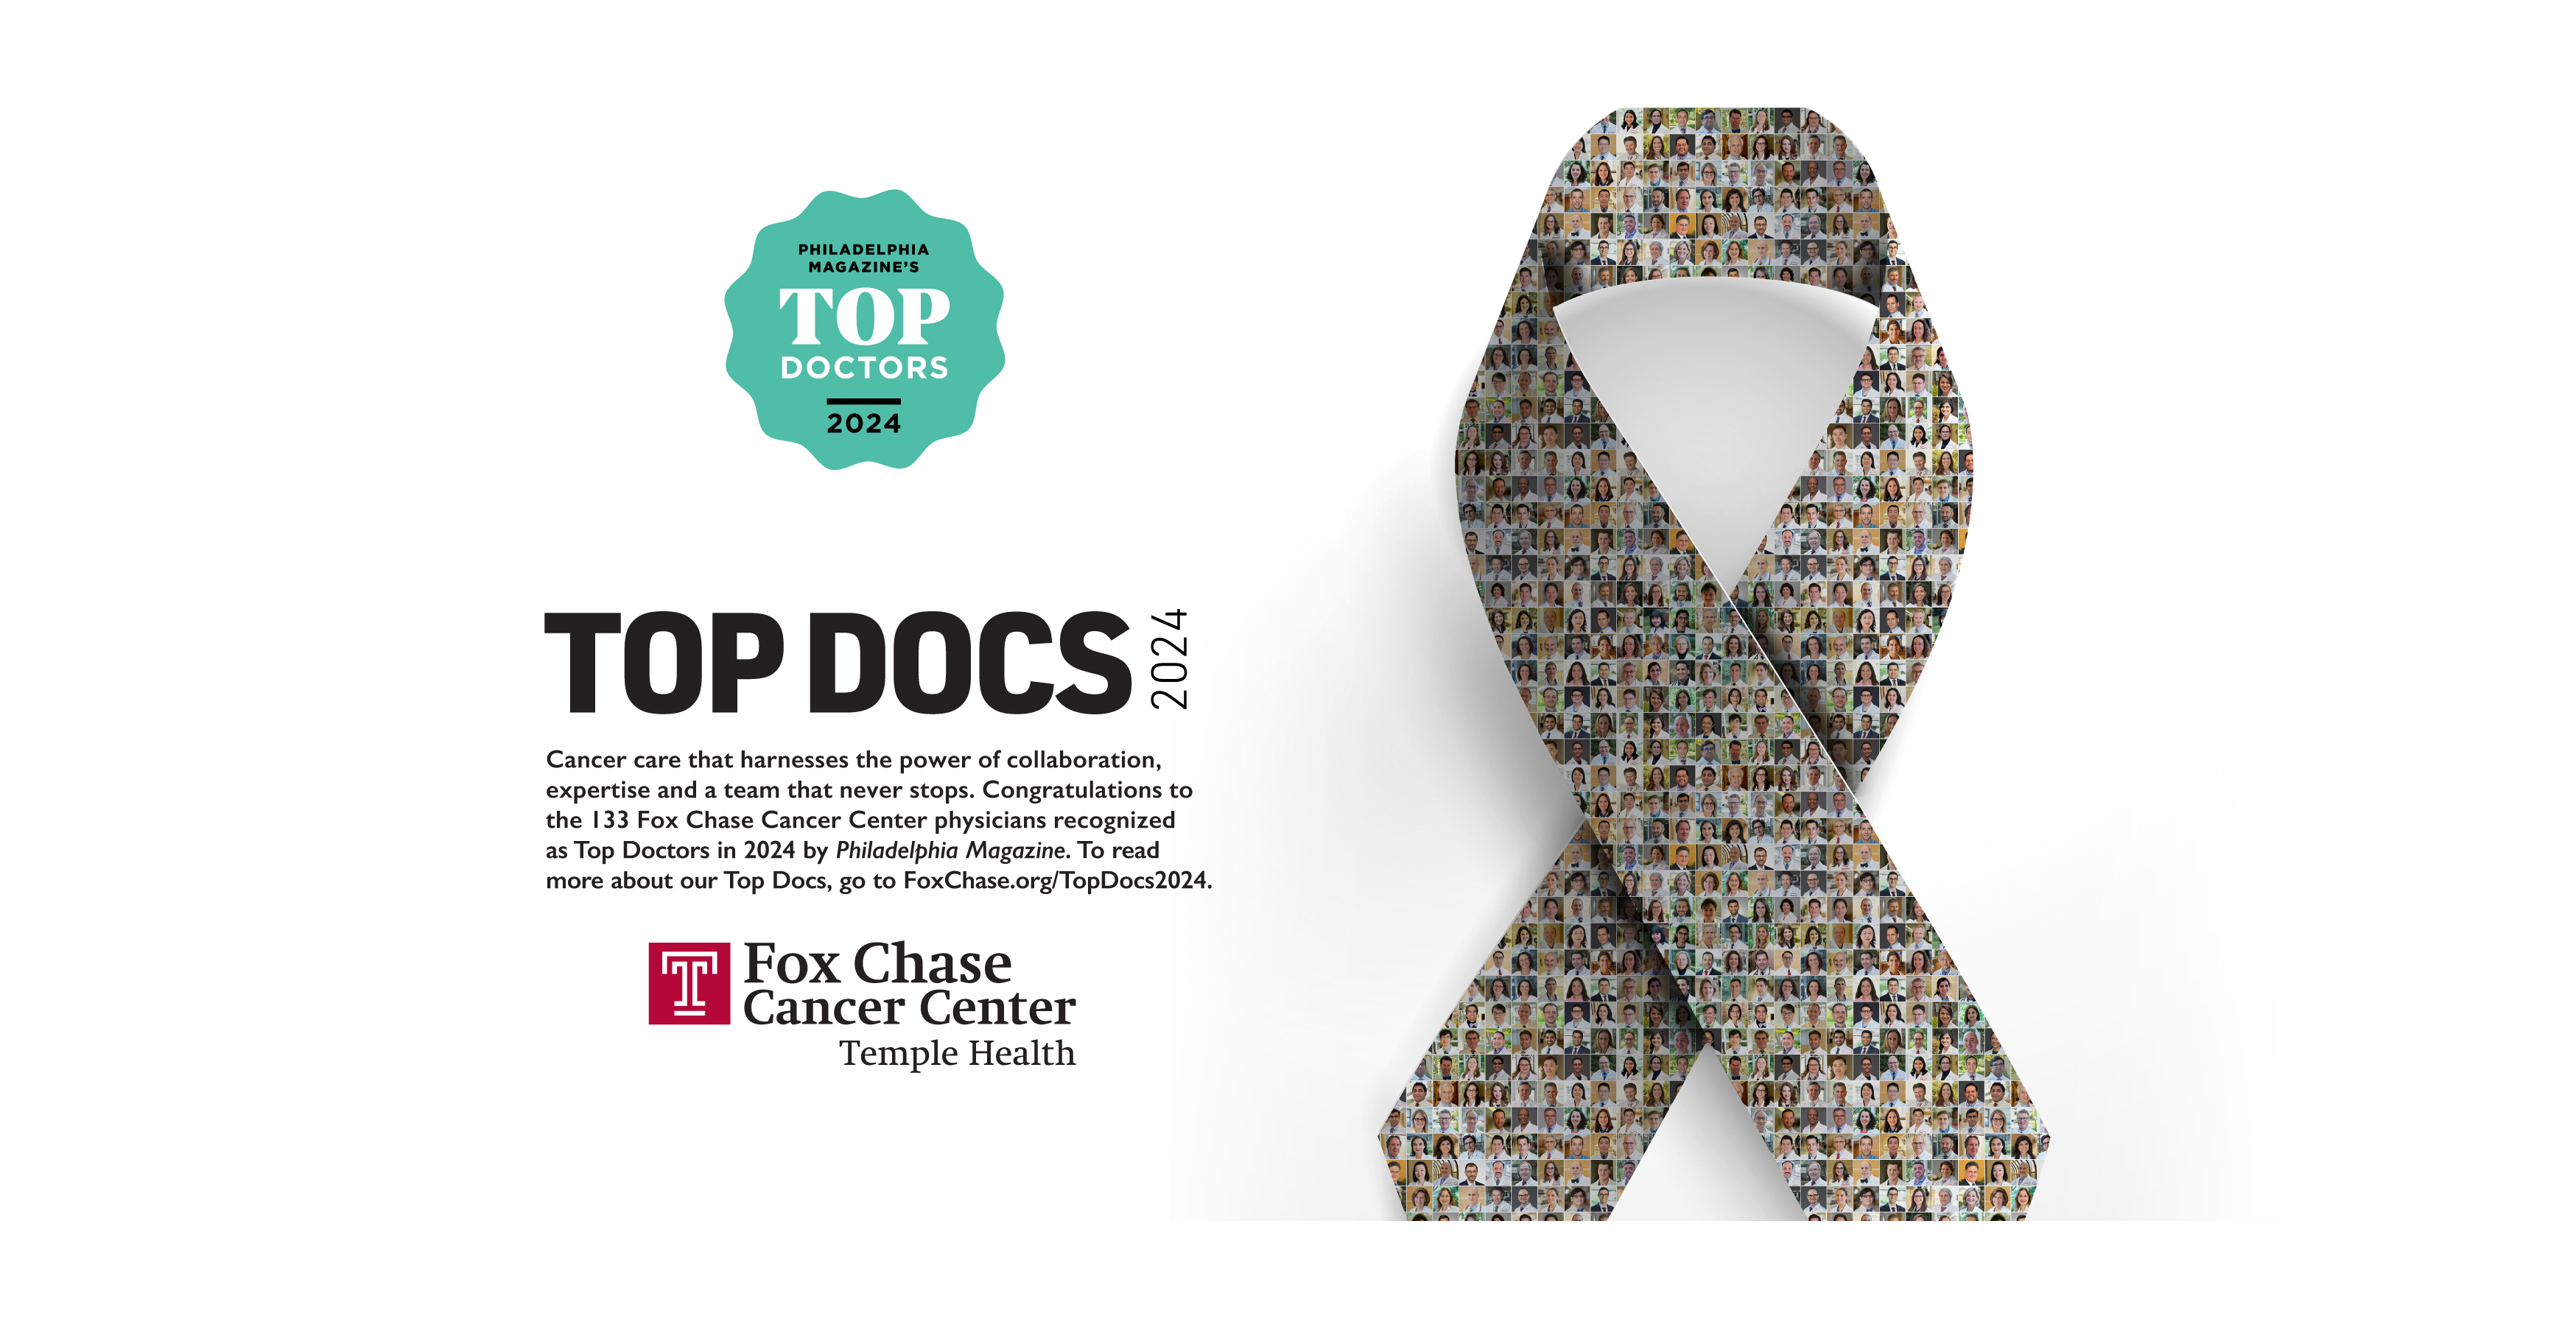 Philadelphia Magazine's Top Doctors 2024 Badge: Cancer care that harnesses the power of collaboration, expertise and a team that never stops.  Congratulations to the 133 Fox Chase Cancer Center physicians recognized as Top Doctors in 2024 by Philadelphia Magazine. To read more about our Top Docs, go to FoxChase.org/TopDocs2024.